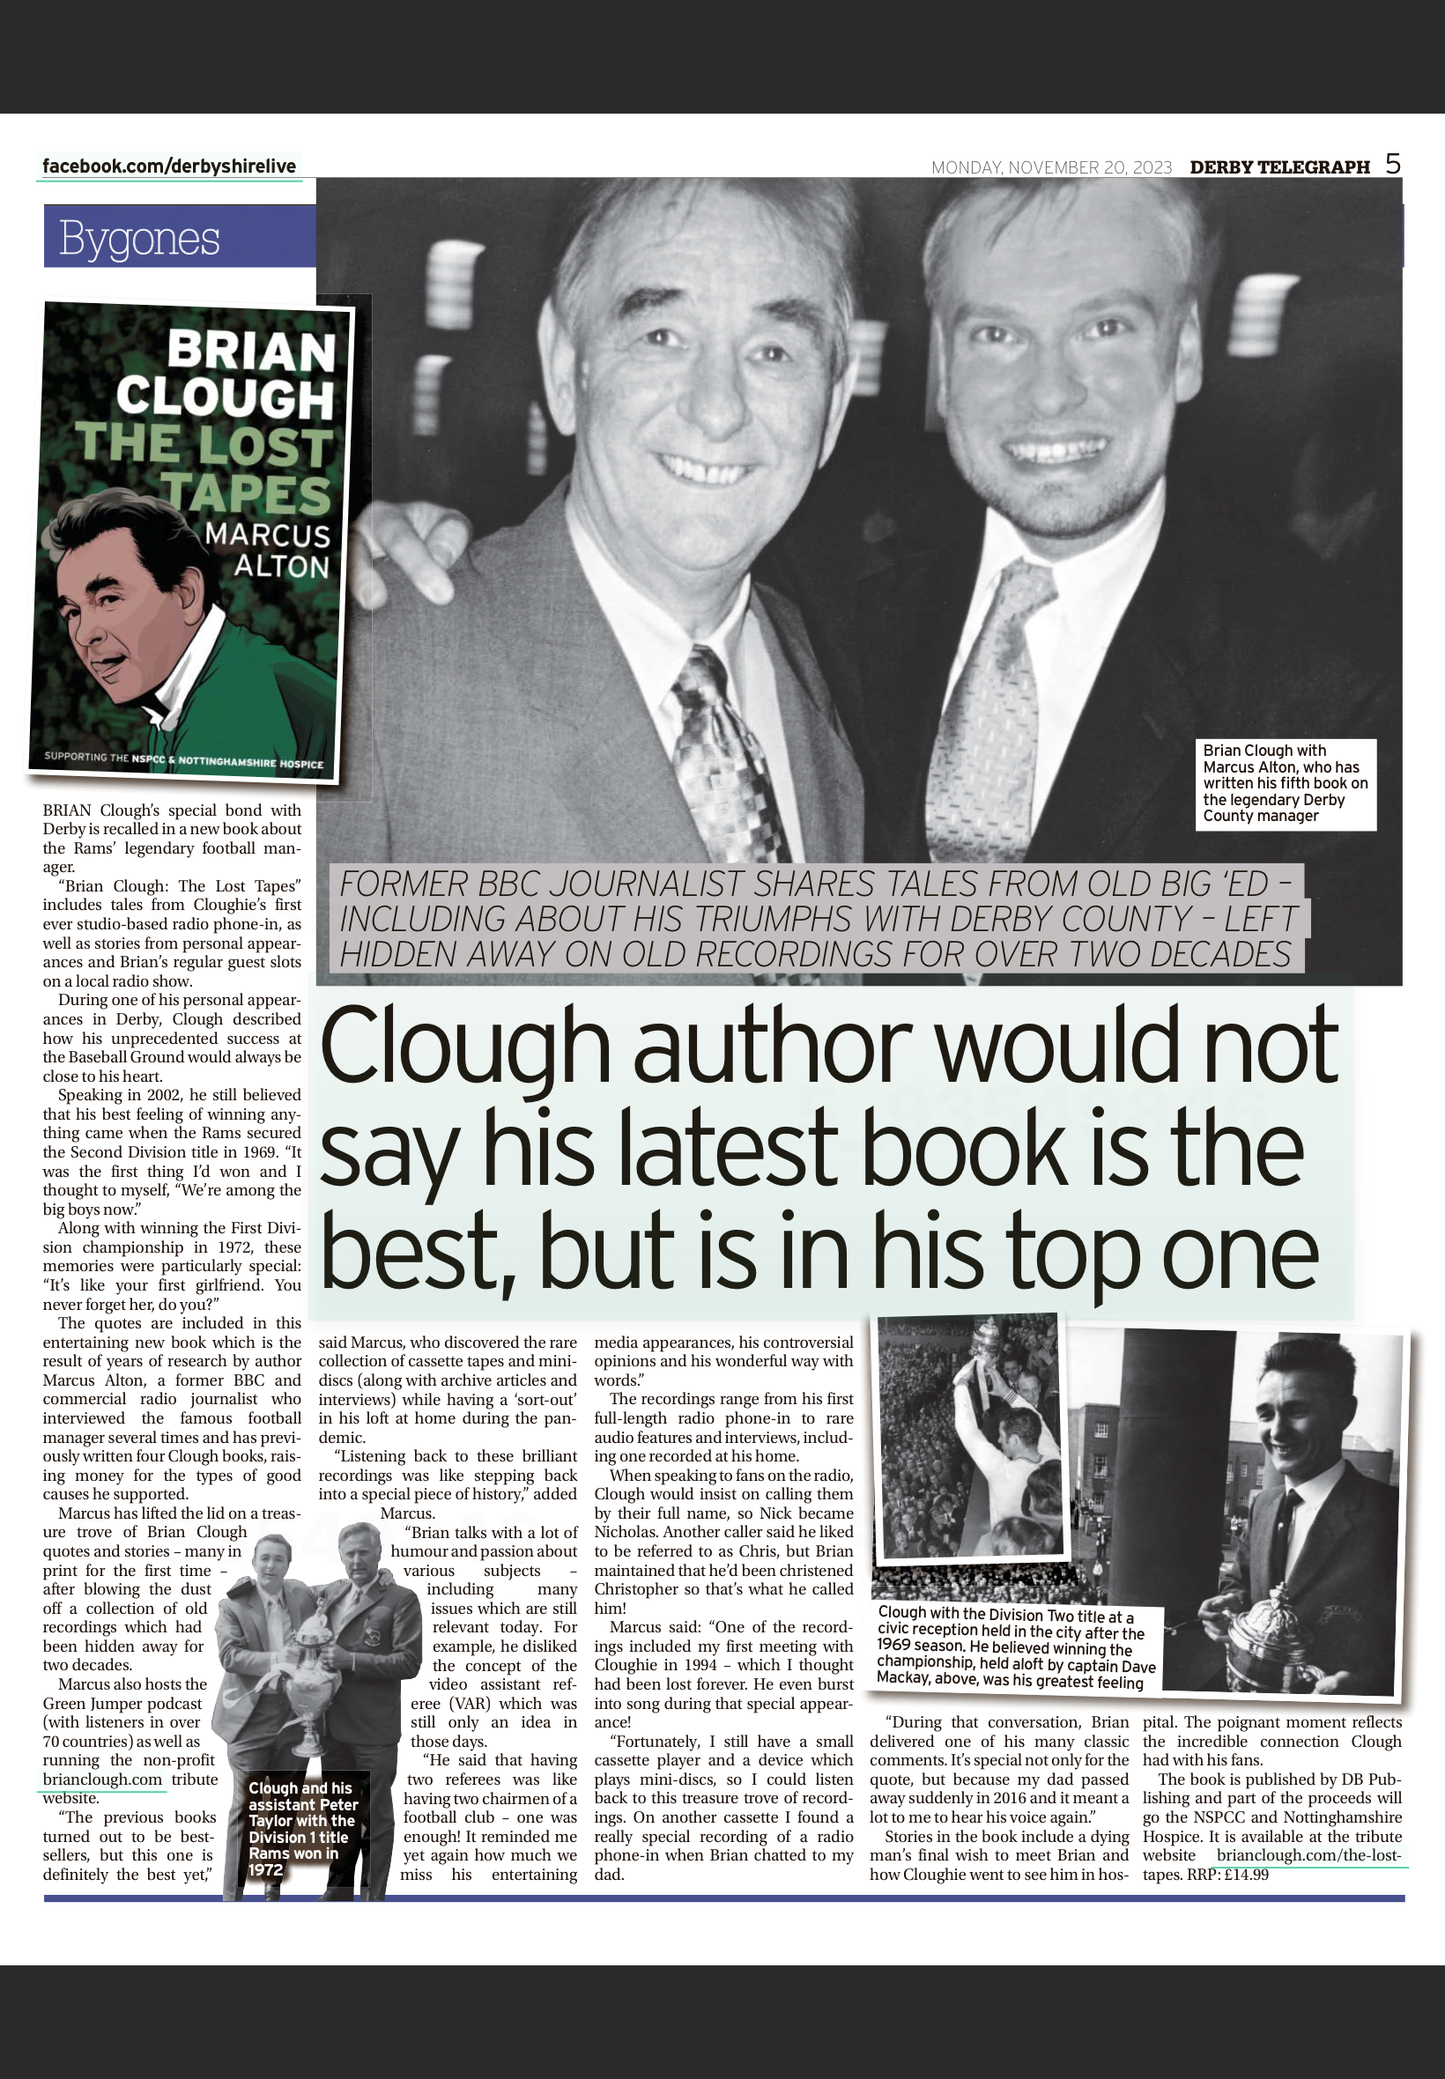 Brian Clough - The Lost Tapes